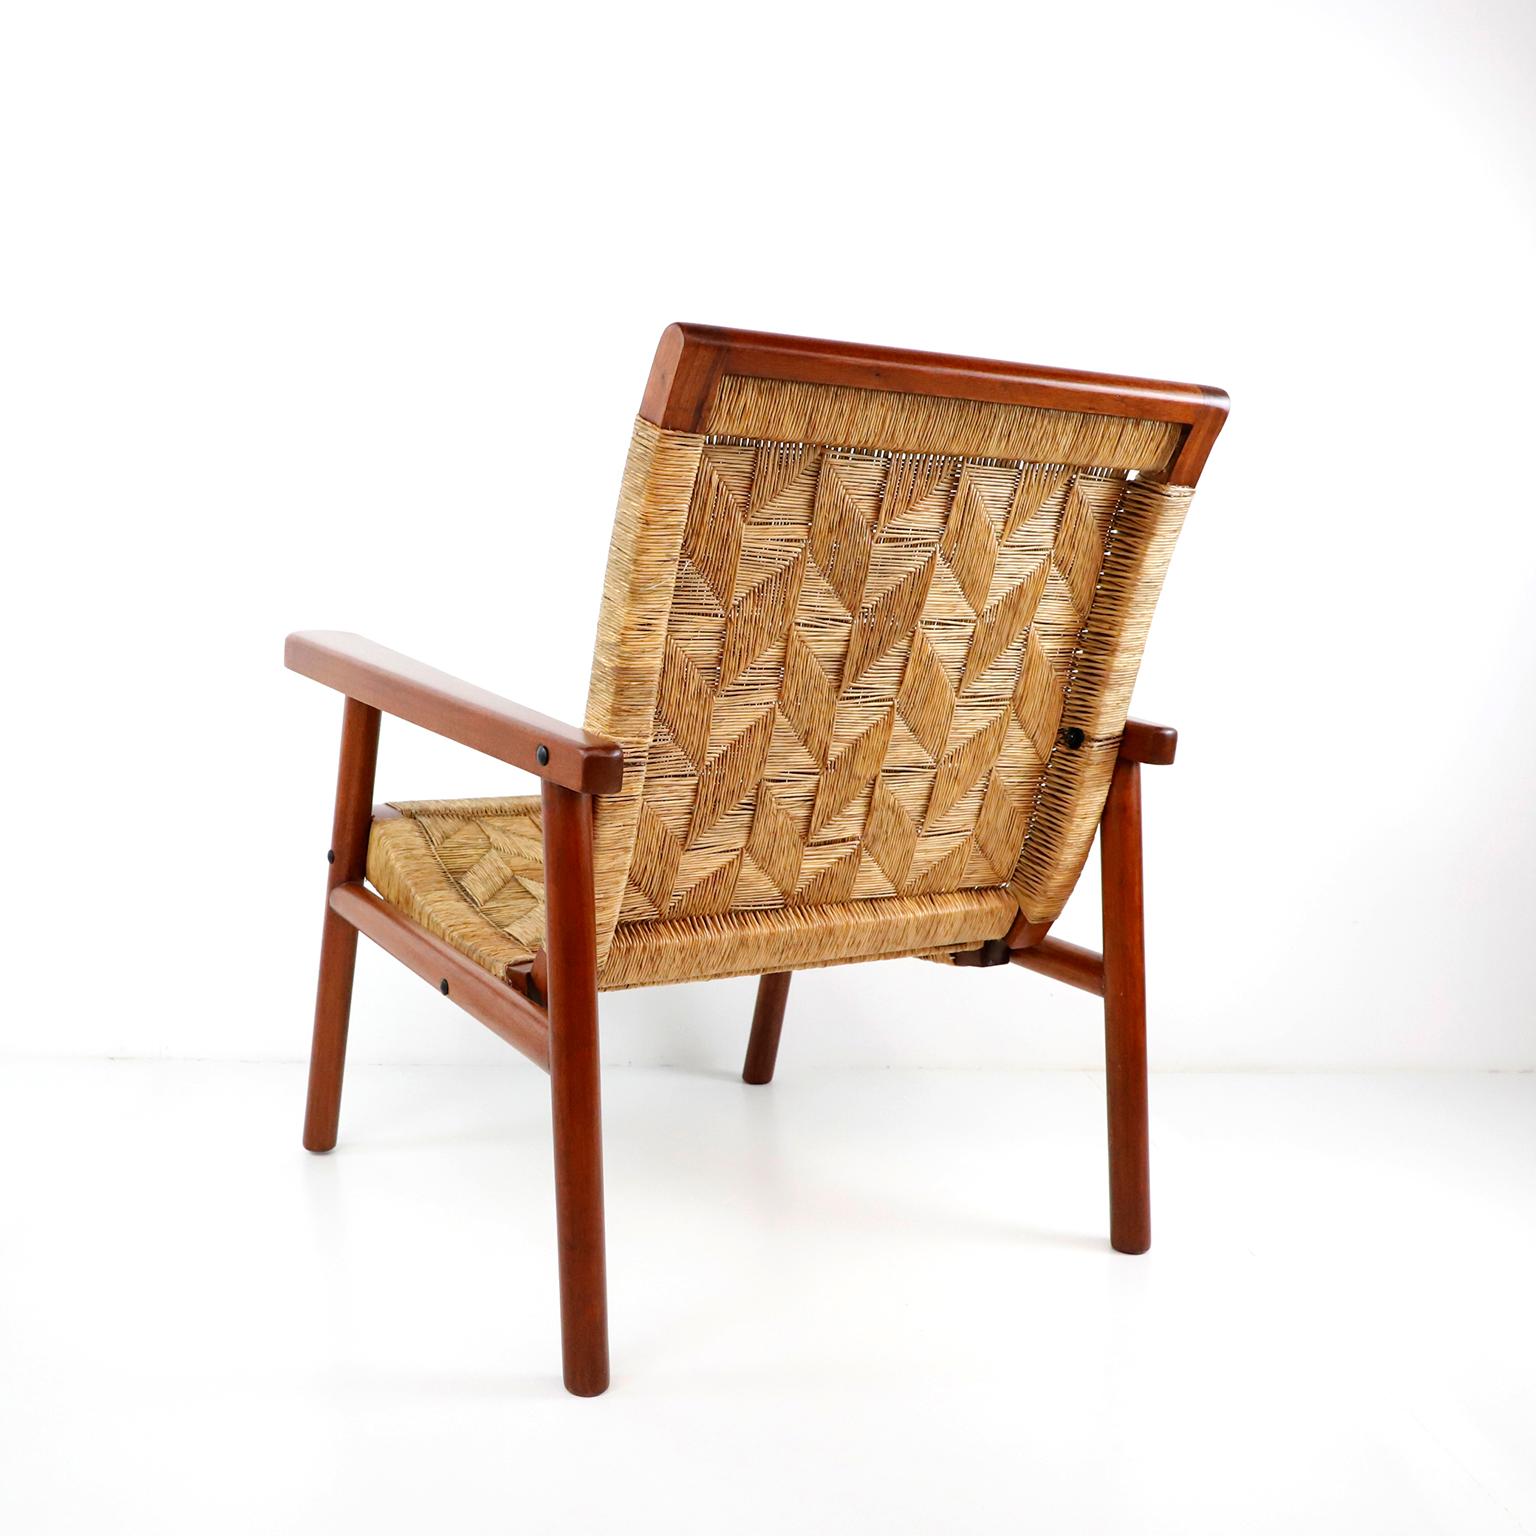 Mid-20th Century Mexican Mid-Century Modern Woven Lounge Chair For Sale